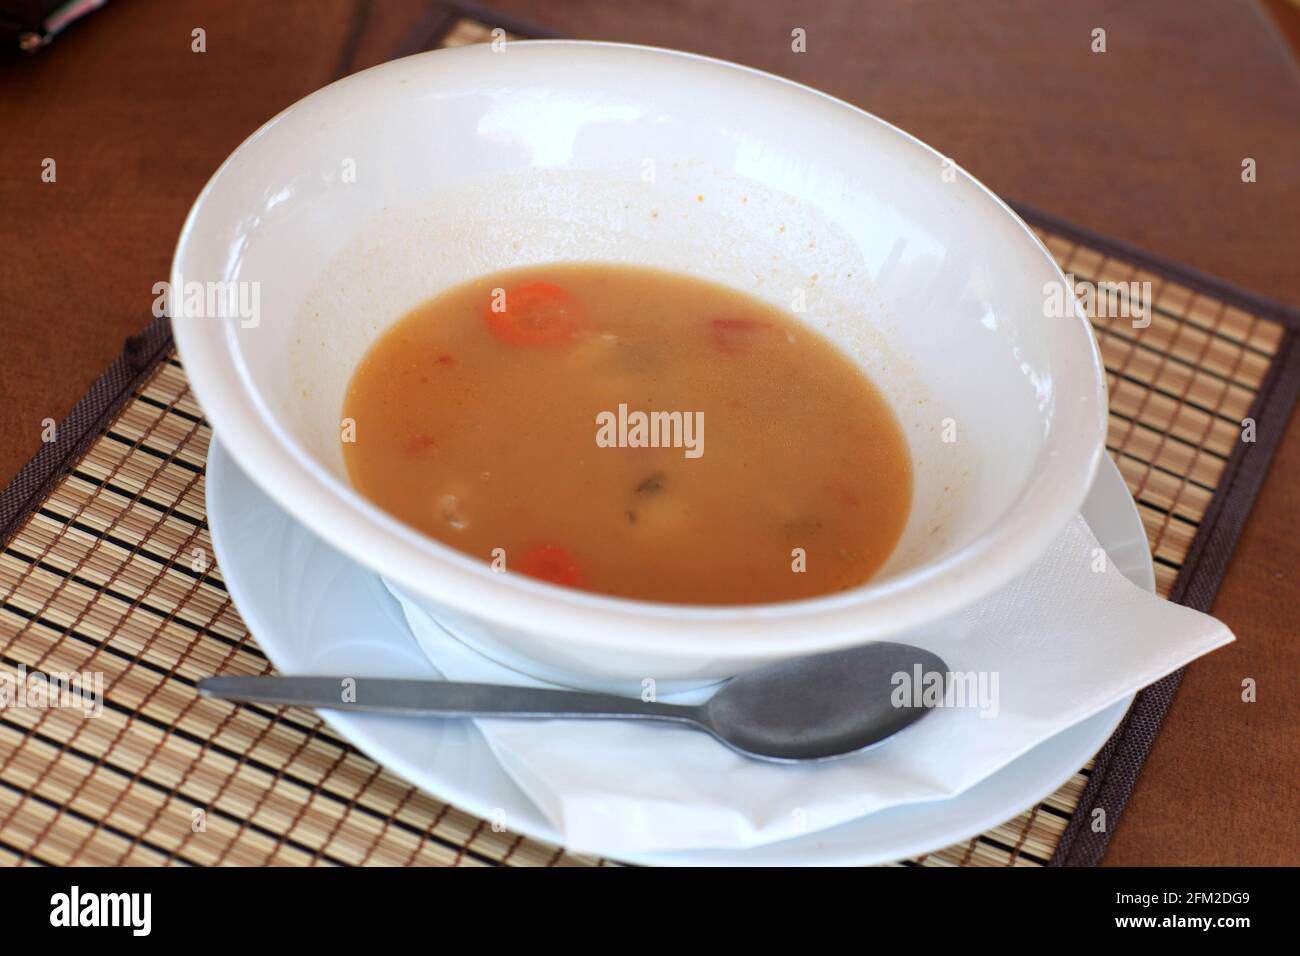 White plate with fish soup in a restaurant Stock Photo